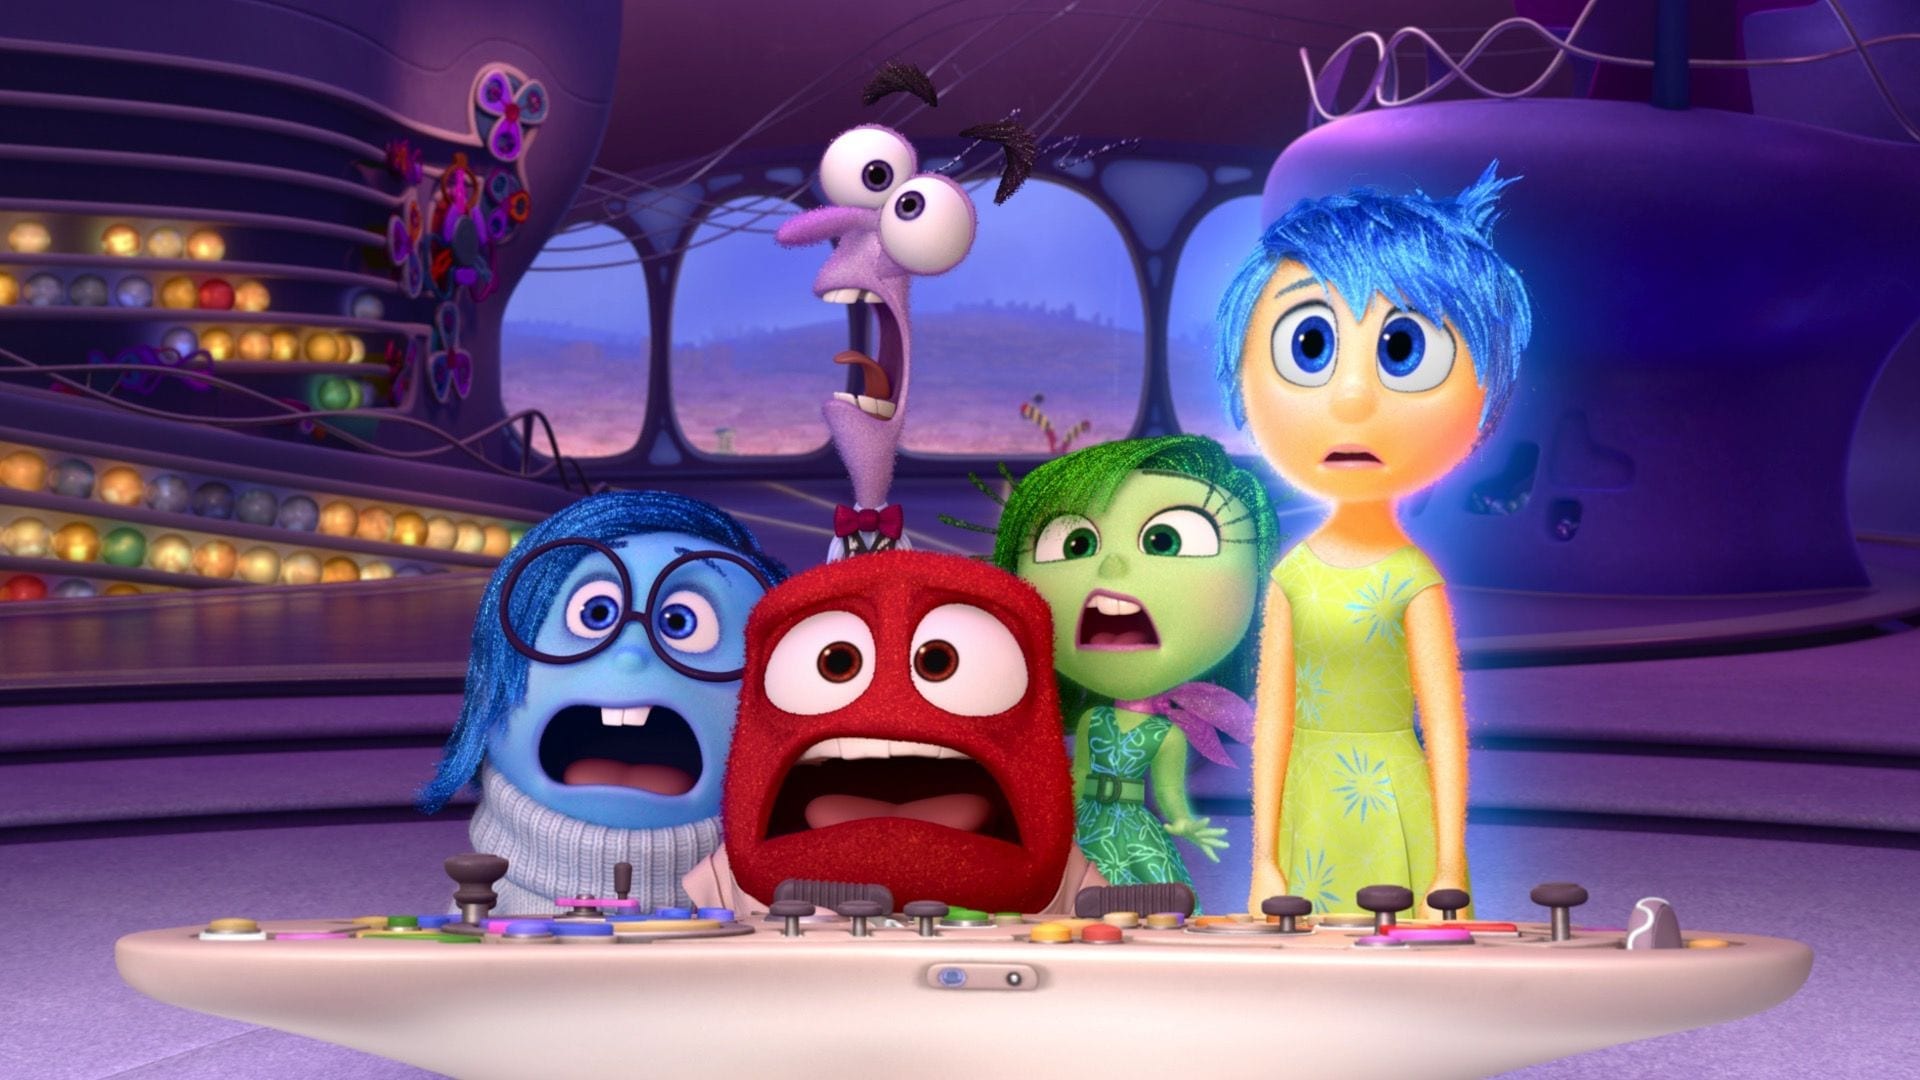 Film Review: Inside Out